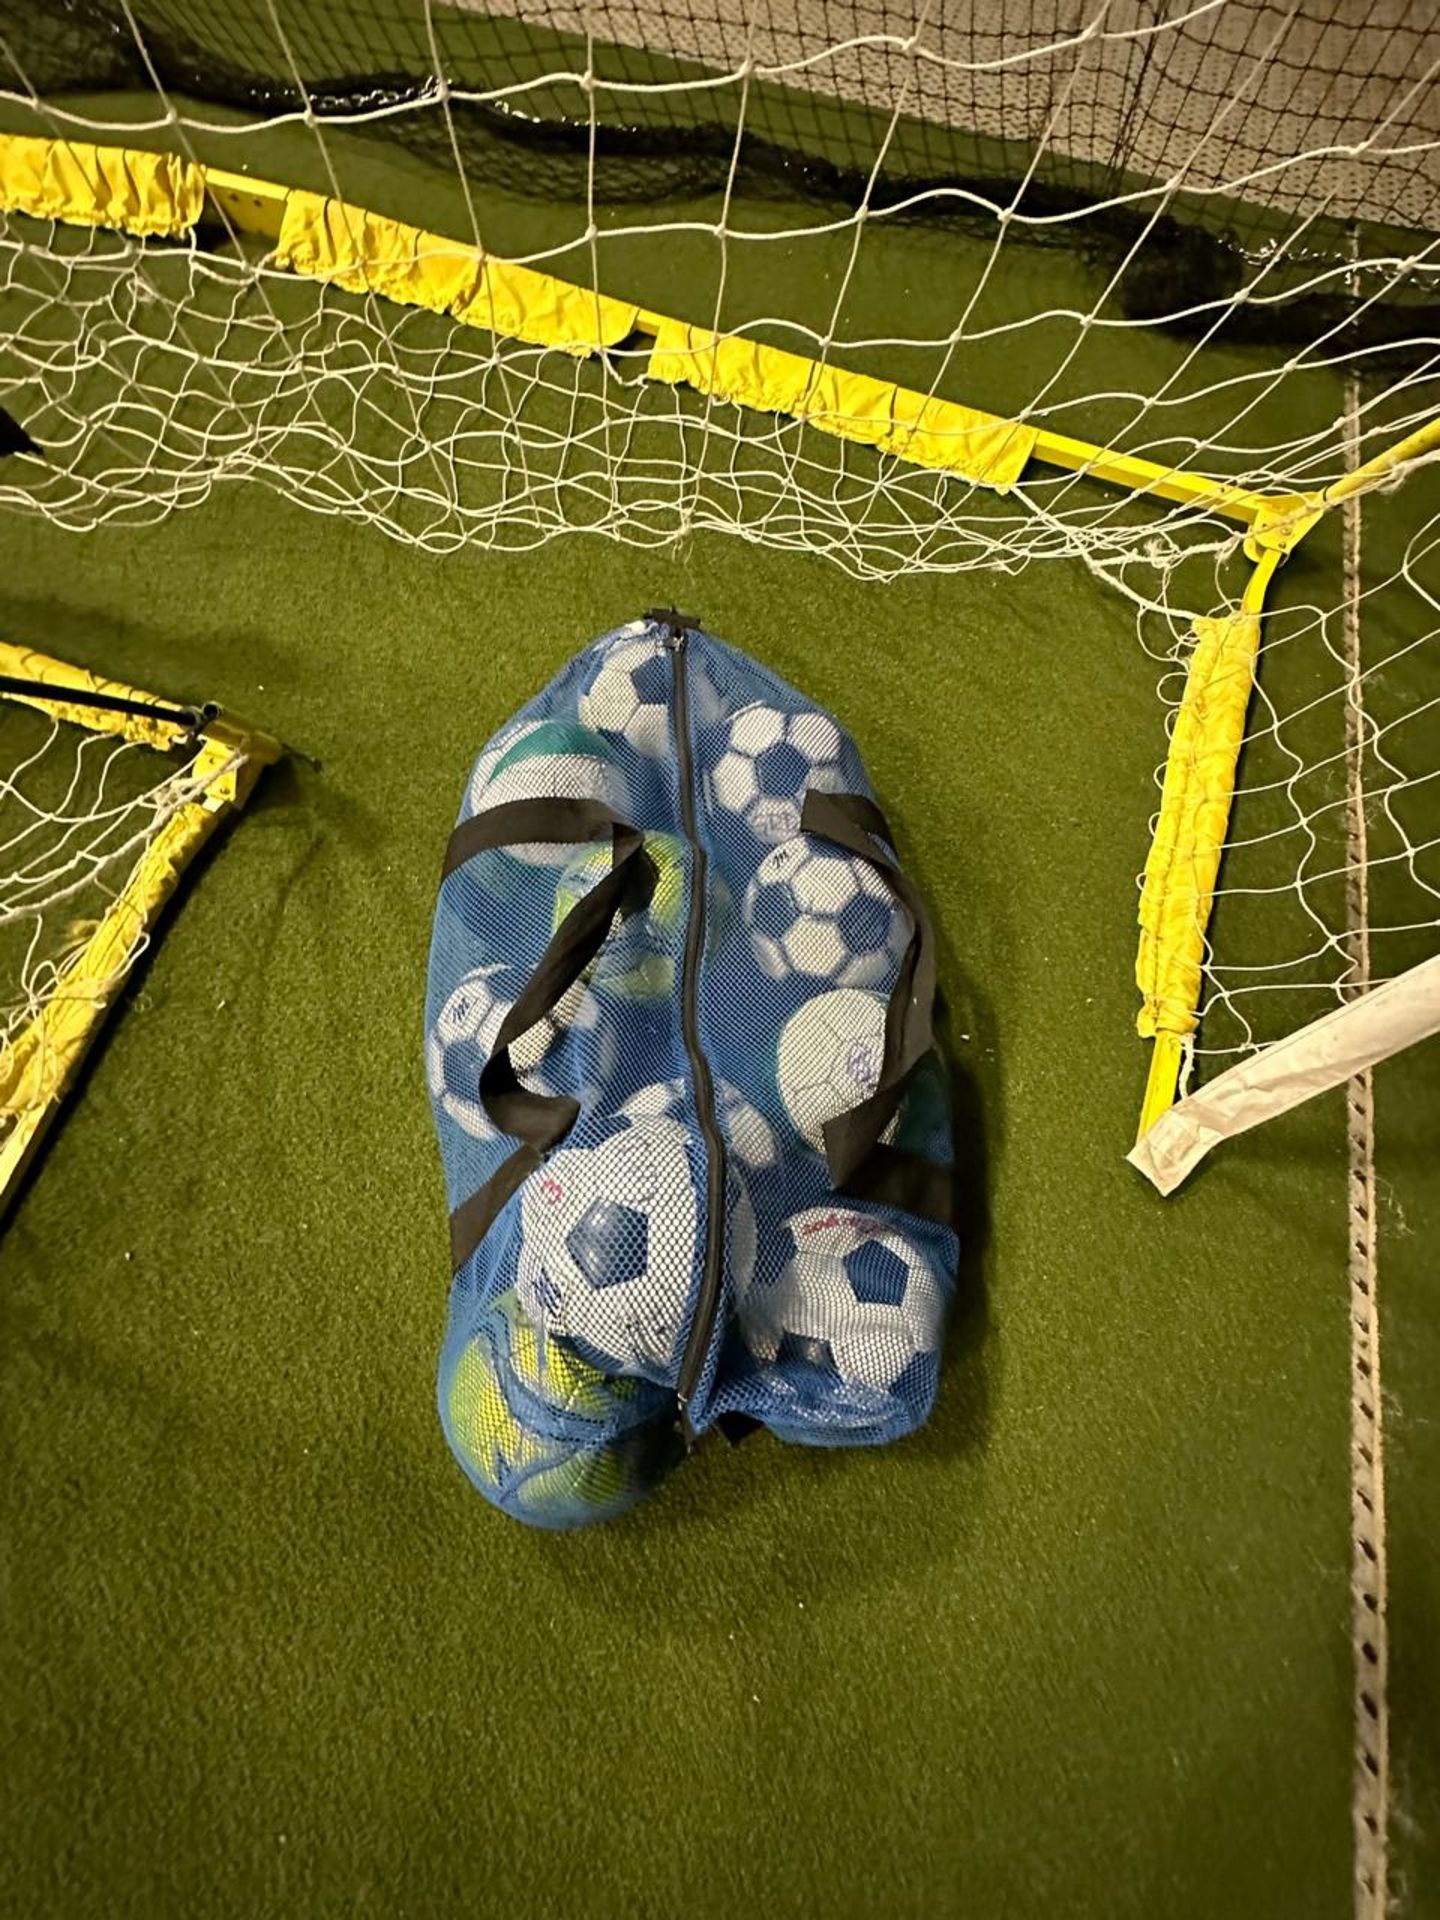 Soccer Net and Accessories - Image 5 of 5